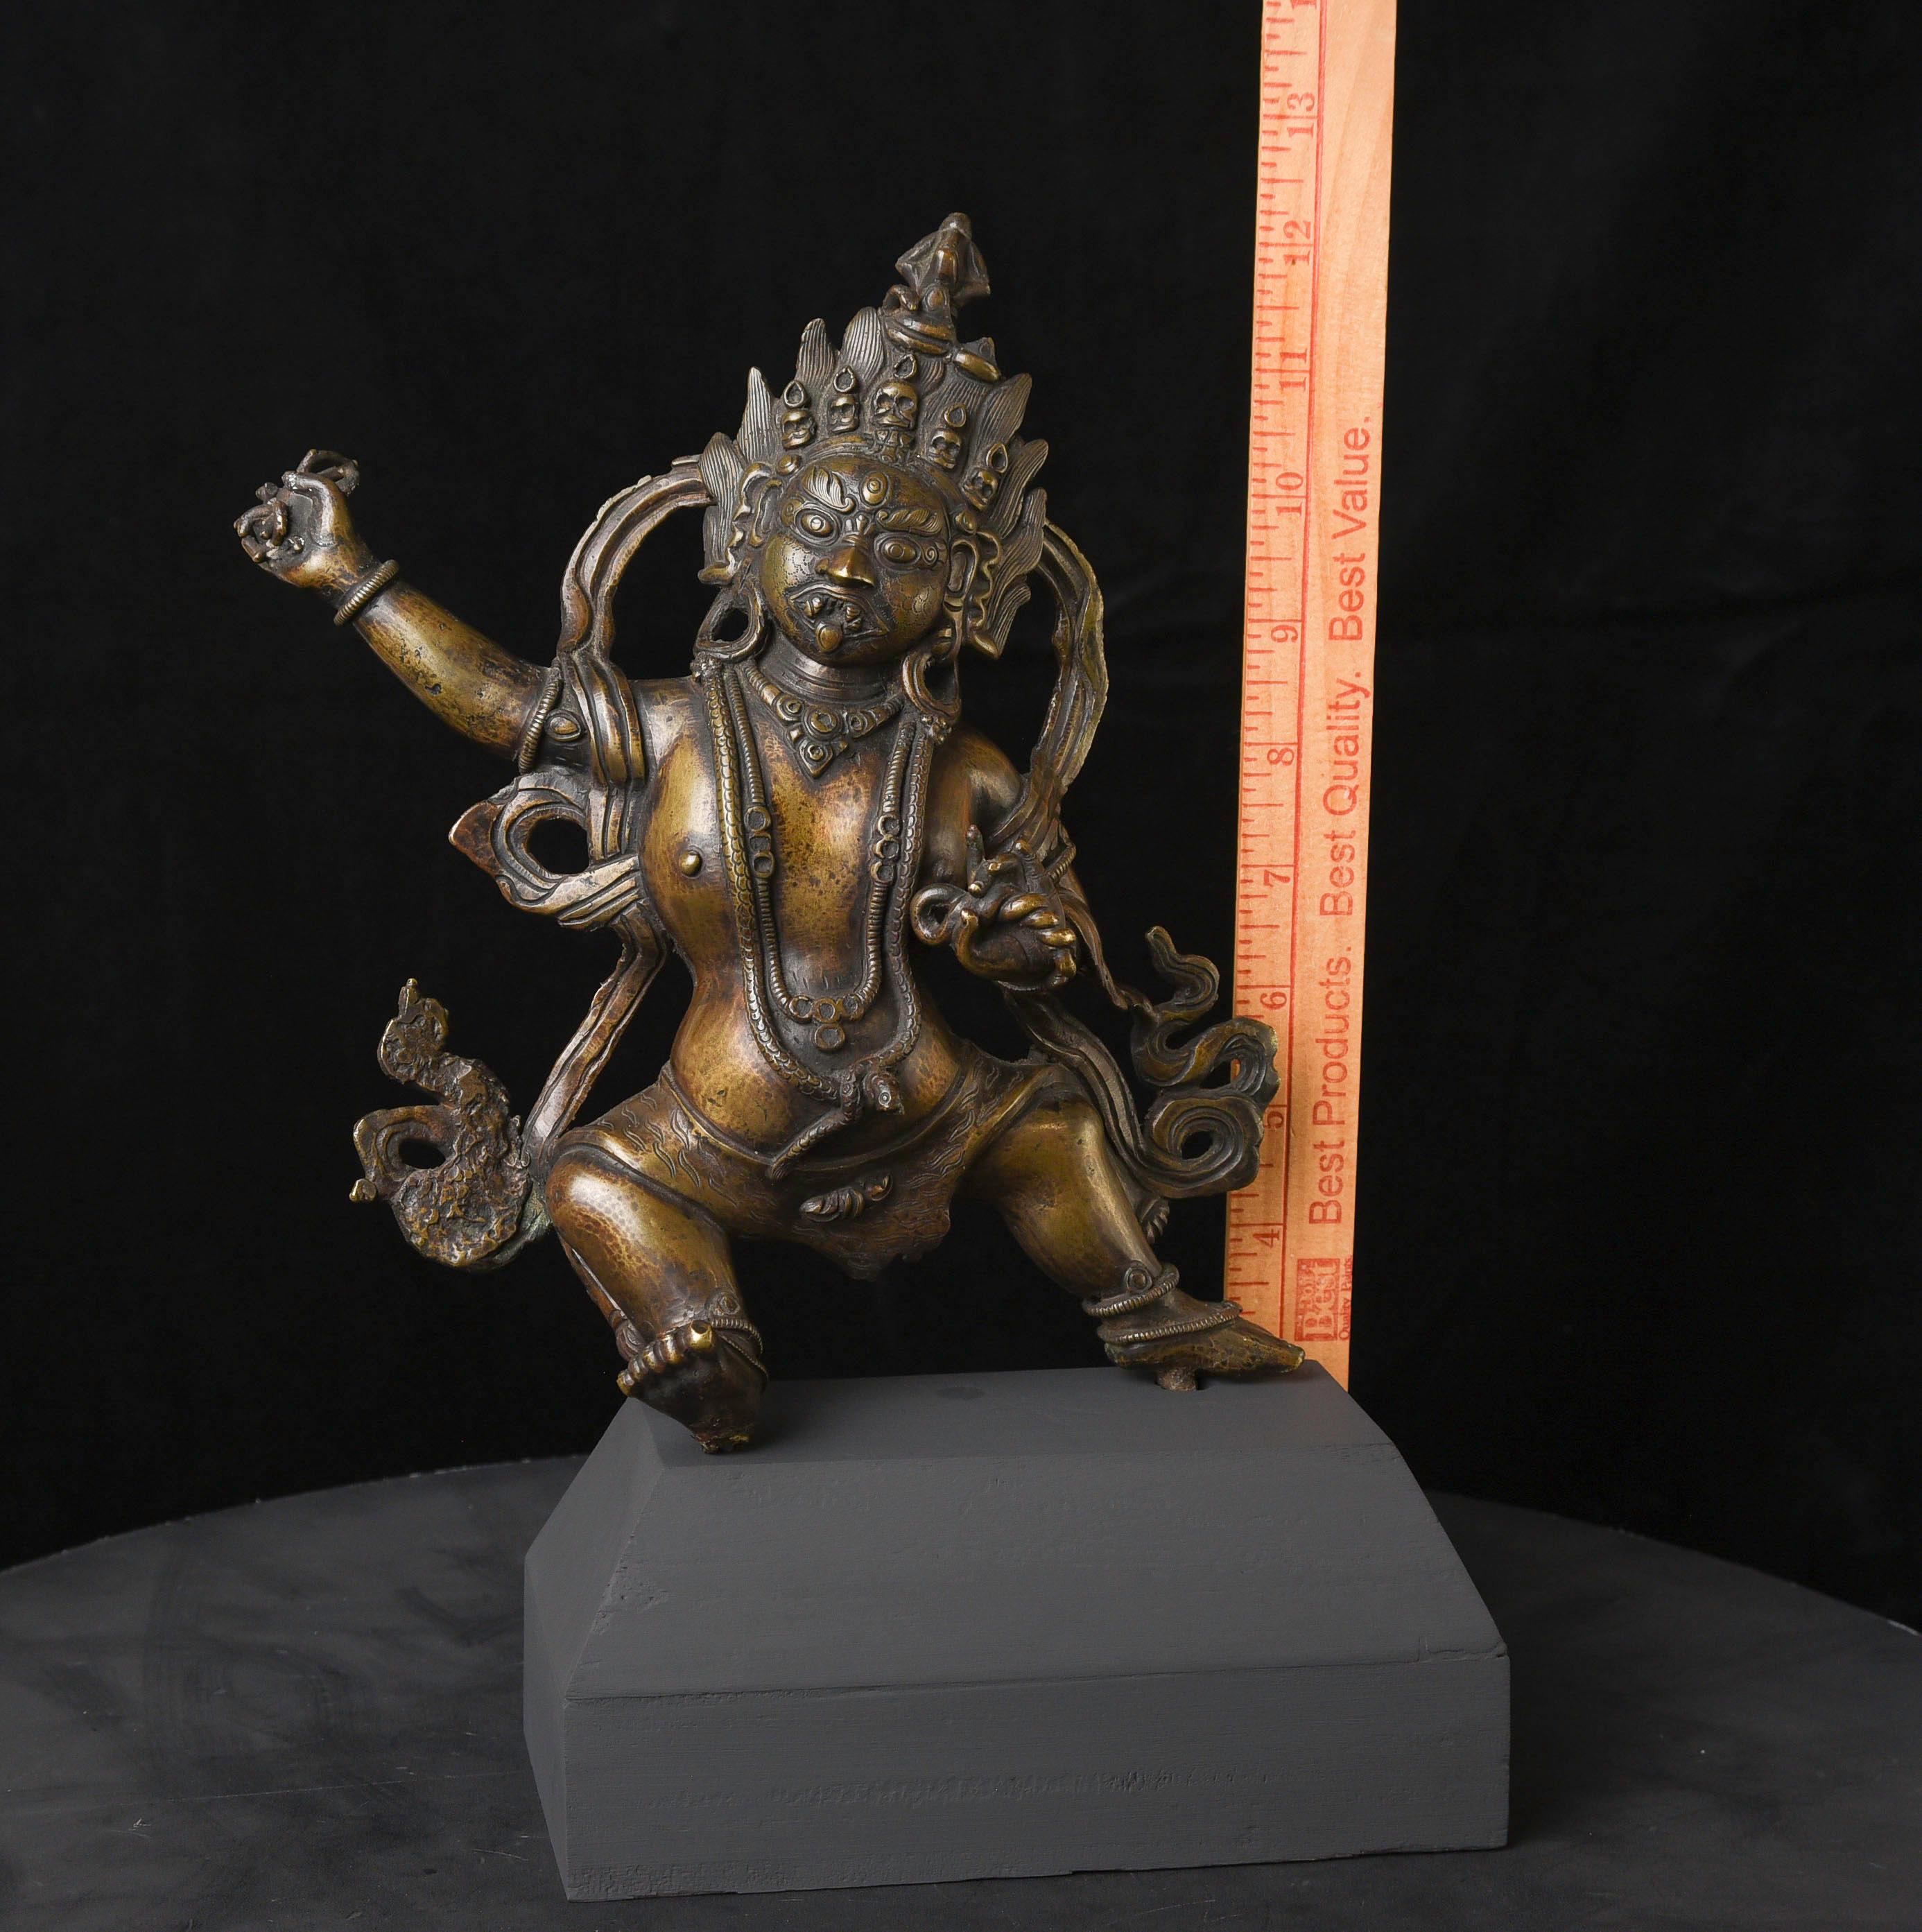 18thC Tibetan Bronze Protective Deity- Very fine and large example. I've had many of this subject over the years, but never one of his quality and Size. spend time looking at the photos , and note the quality of the casting, sculpting, and patina.